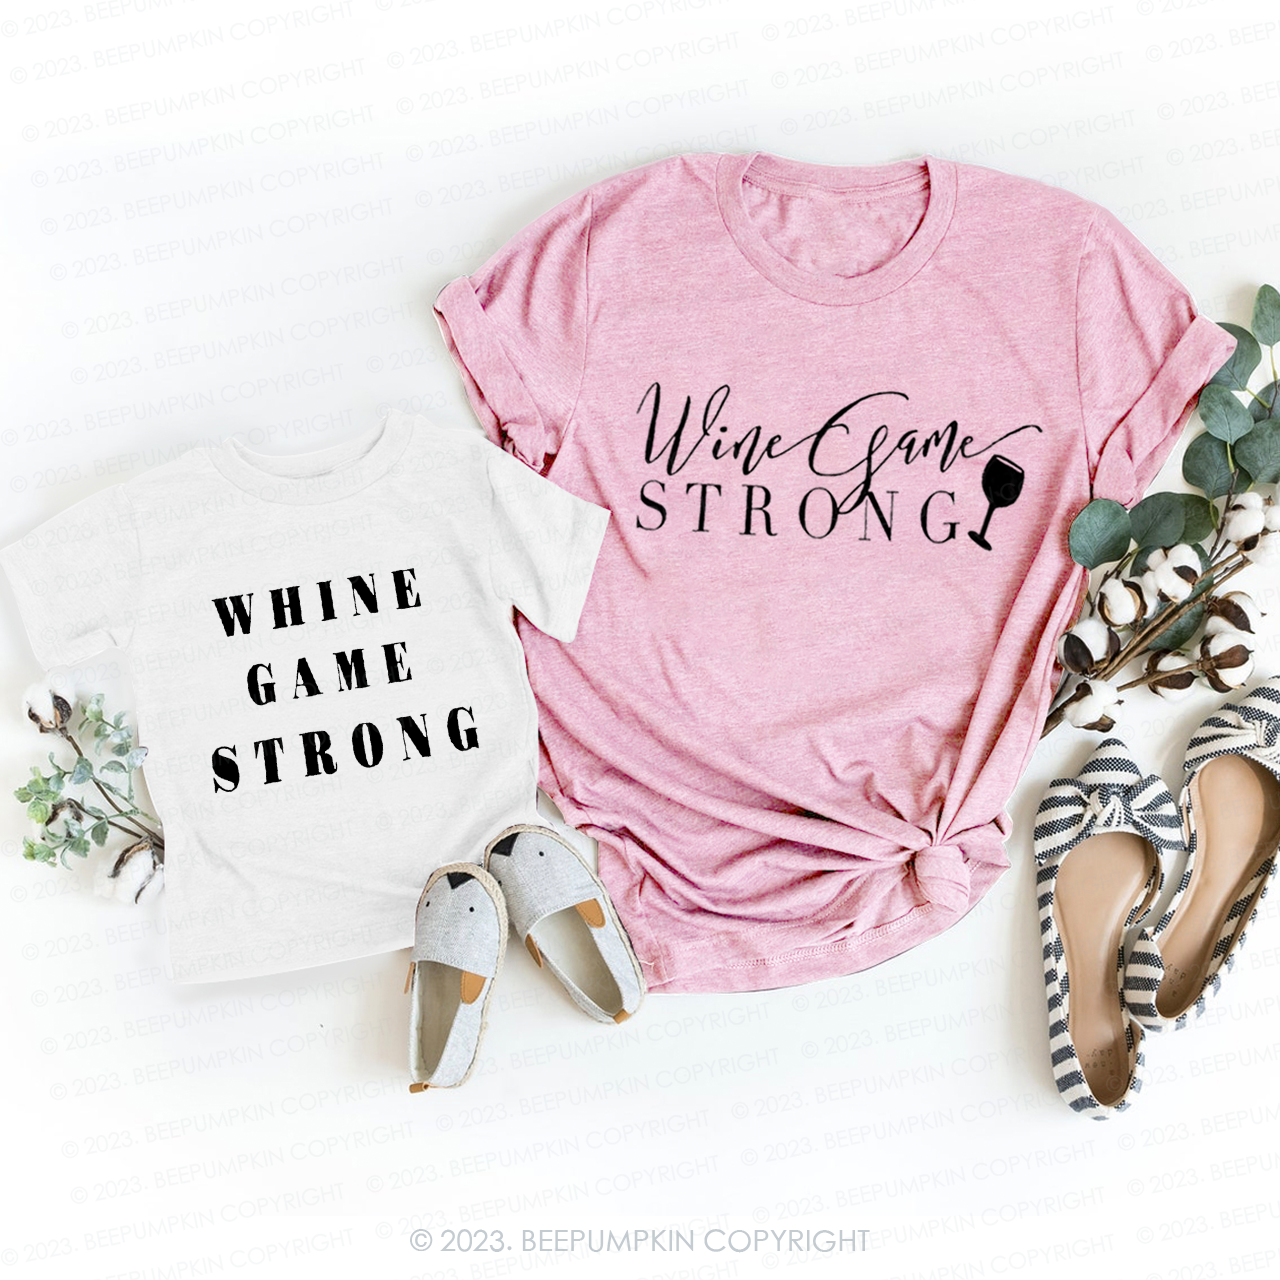 While Game Strong T-Shirts For Mom&Me